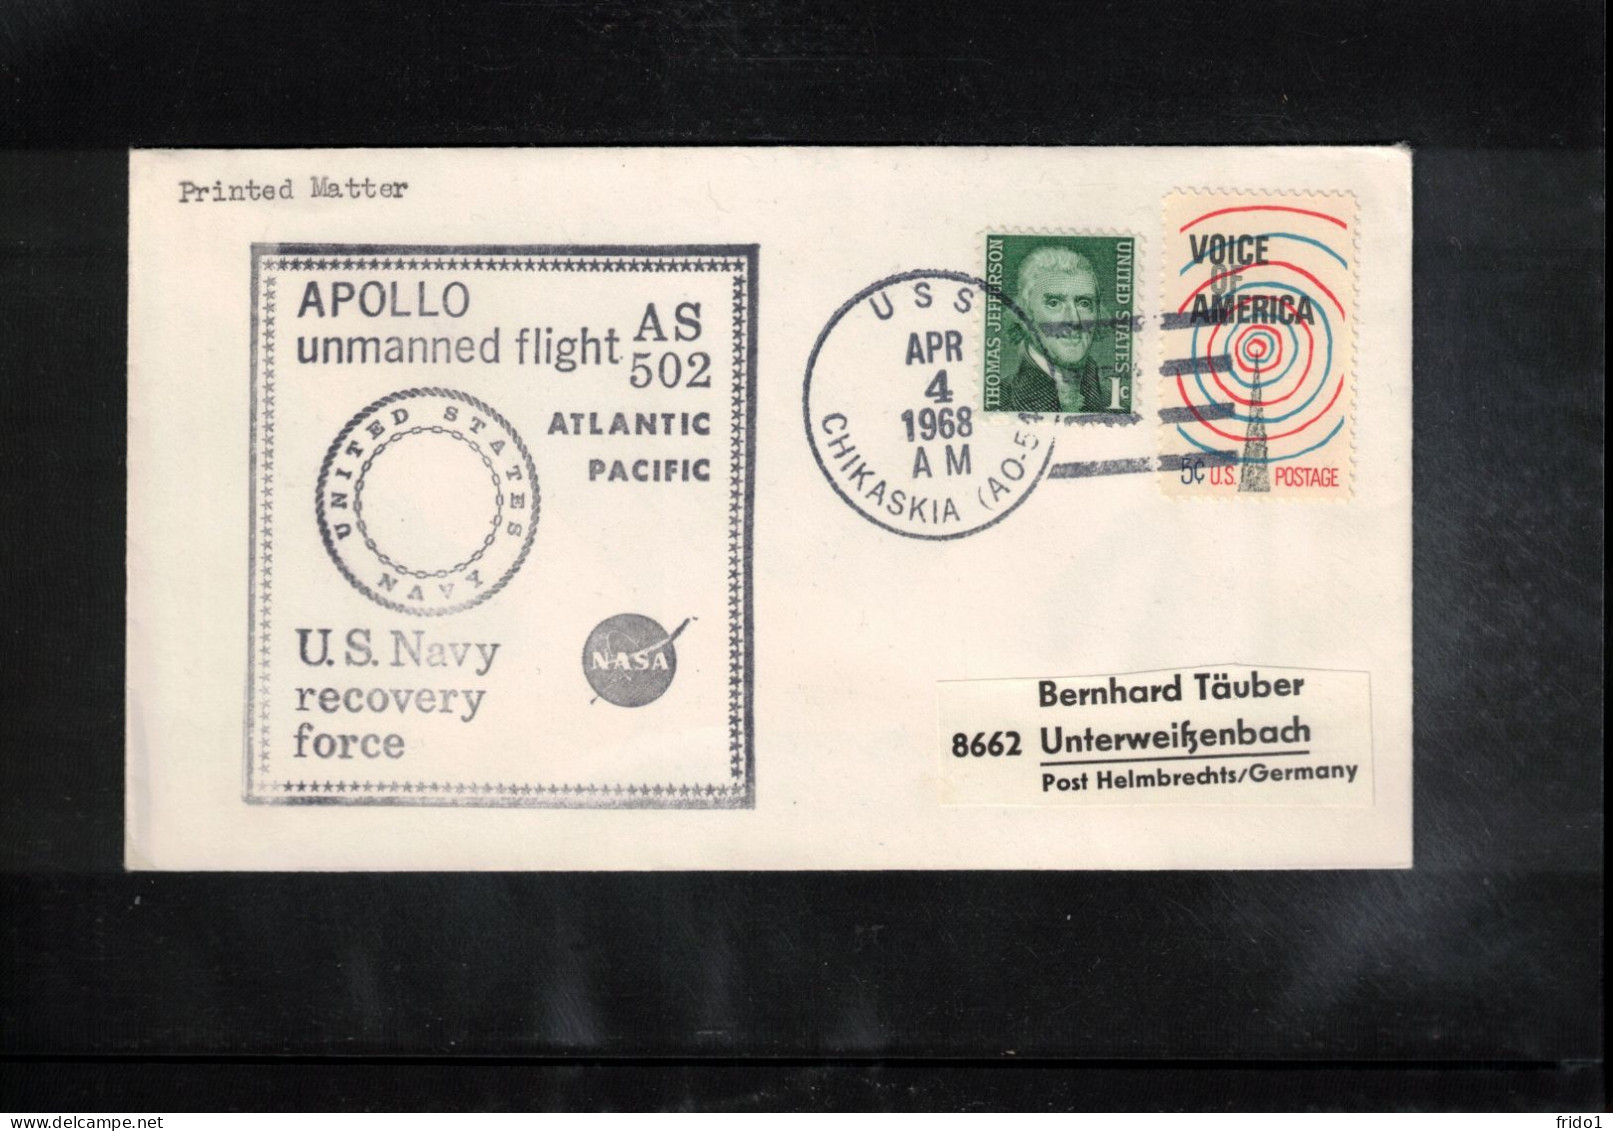 USA 1968 Space / Weltraum Apollo Unmanned Flight AS 502 - US Navy Recovery Force Ship USS Chikaskia Interesting Cover - Verenigde Staten